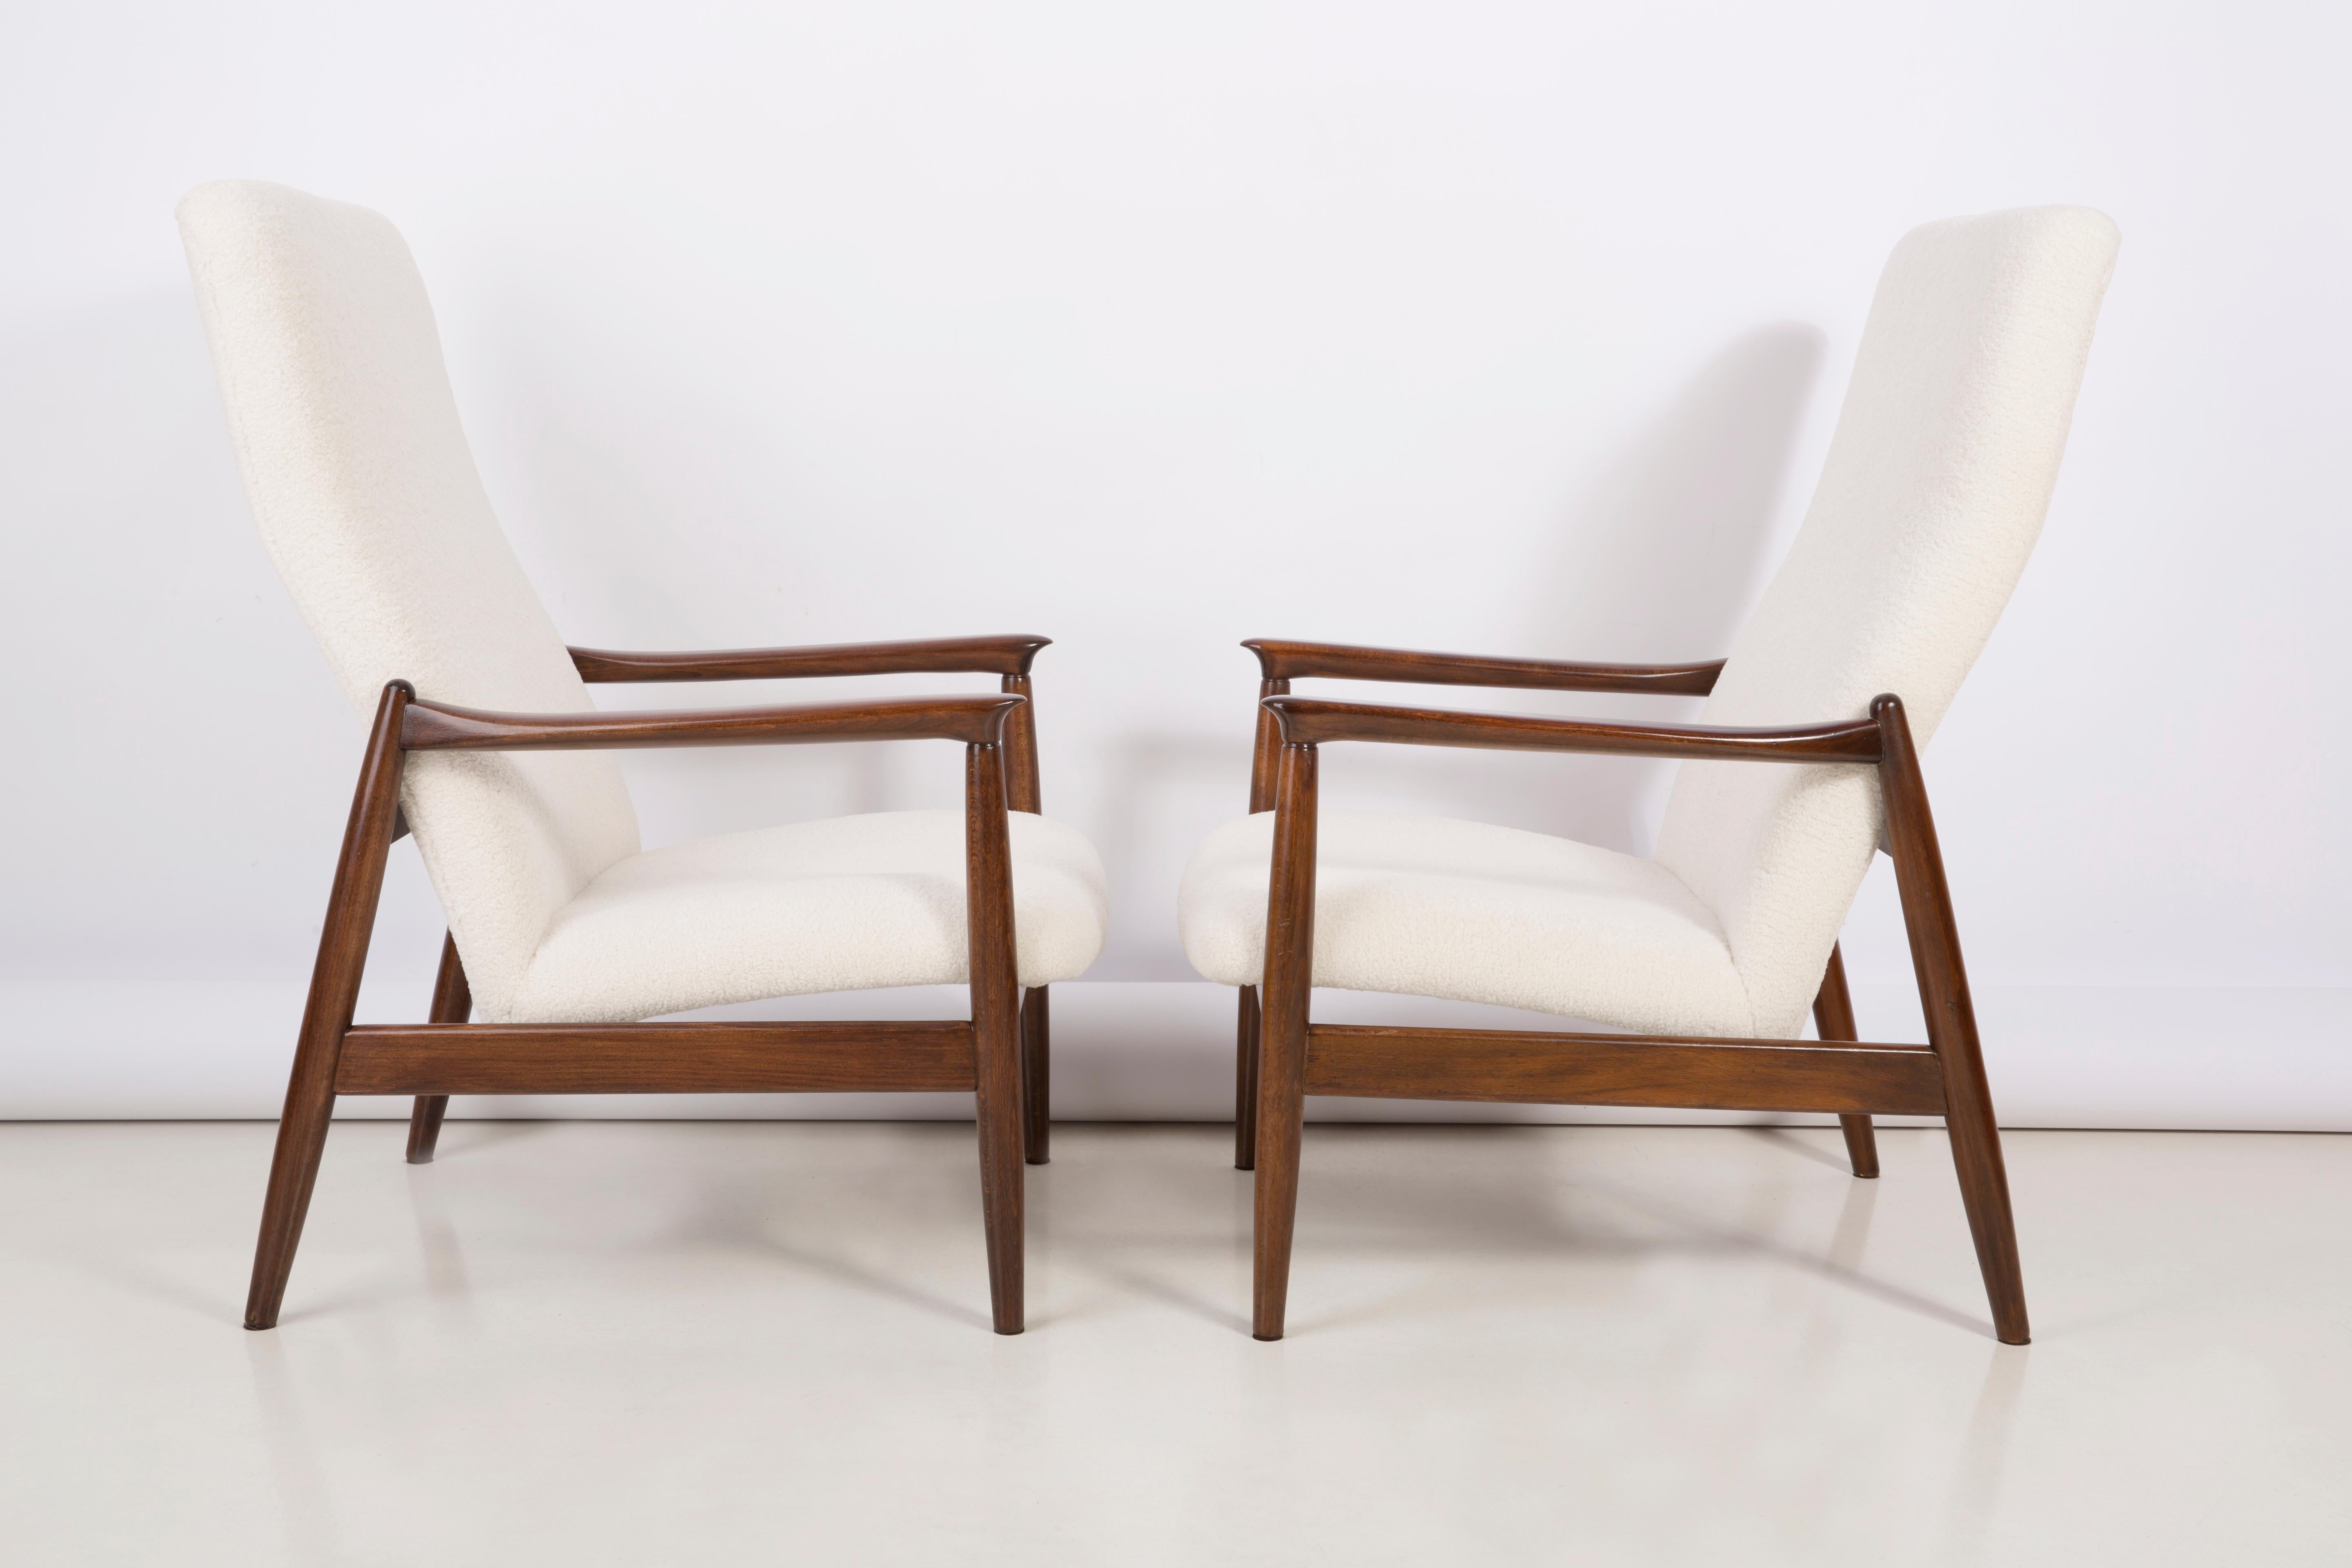 A pair of light crème bouclé armchairs, designed by Edmund Homa, a Polish architect, designer of Industrial Design and interior architecture, professor at the Academy of Fine Arts in Gdansk.

The armchairs were made in the 1960s in the